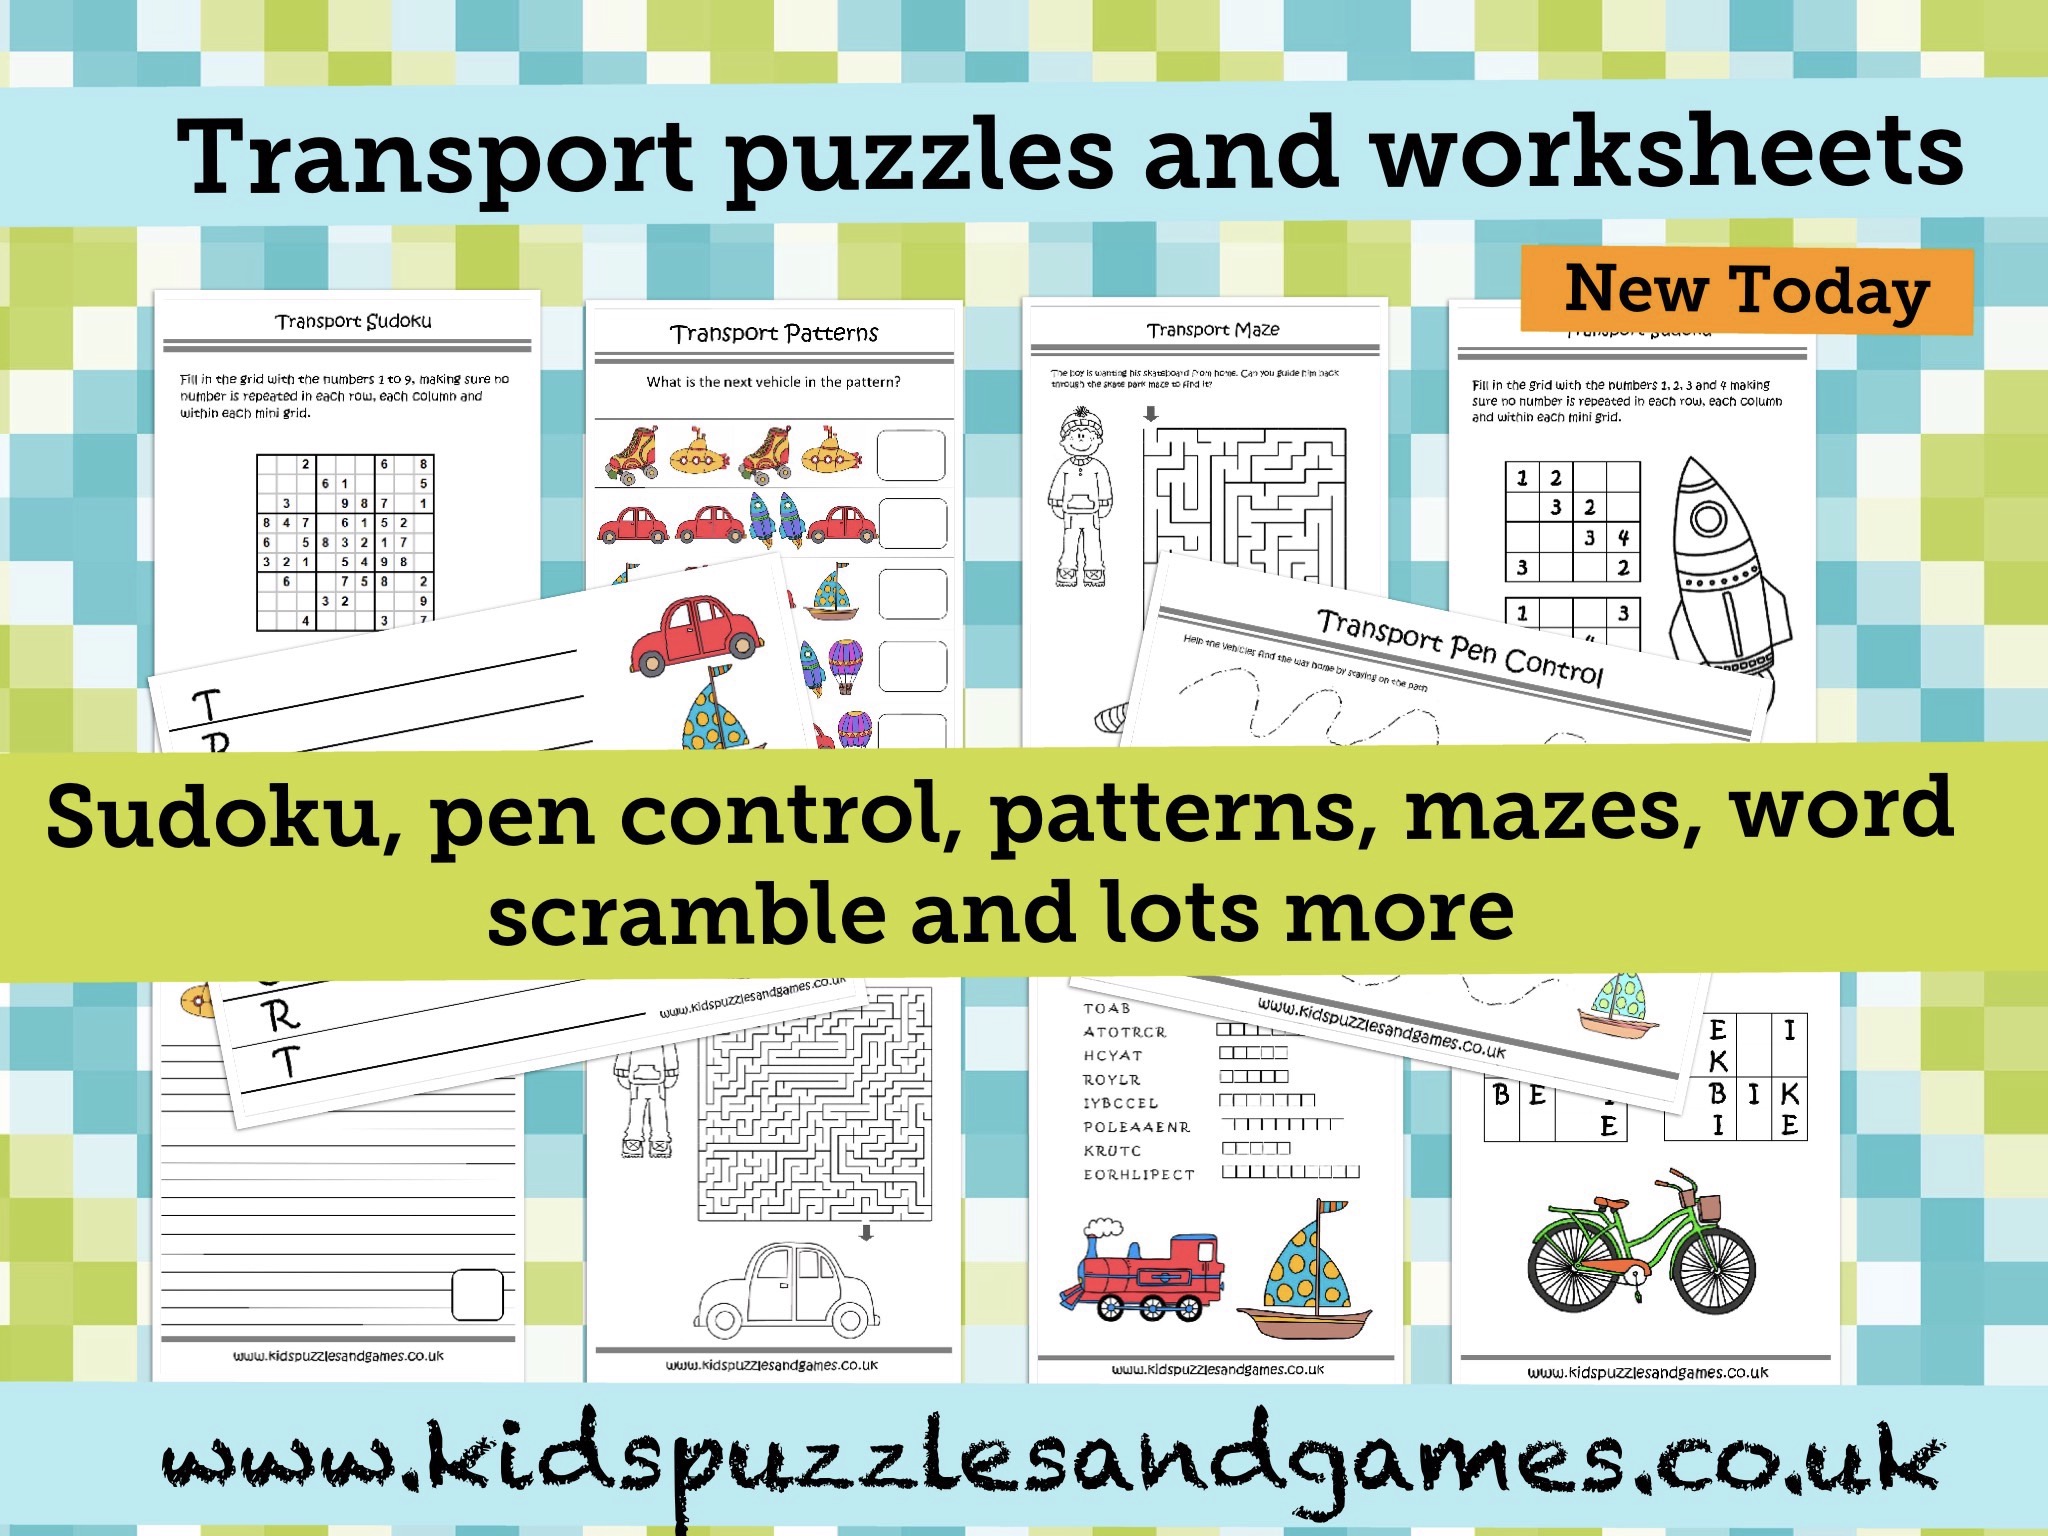 All new transport puzzles and worksheets